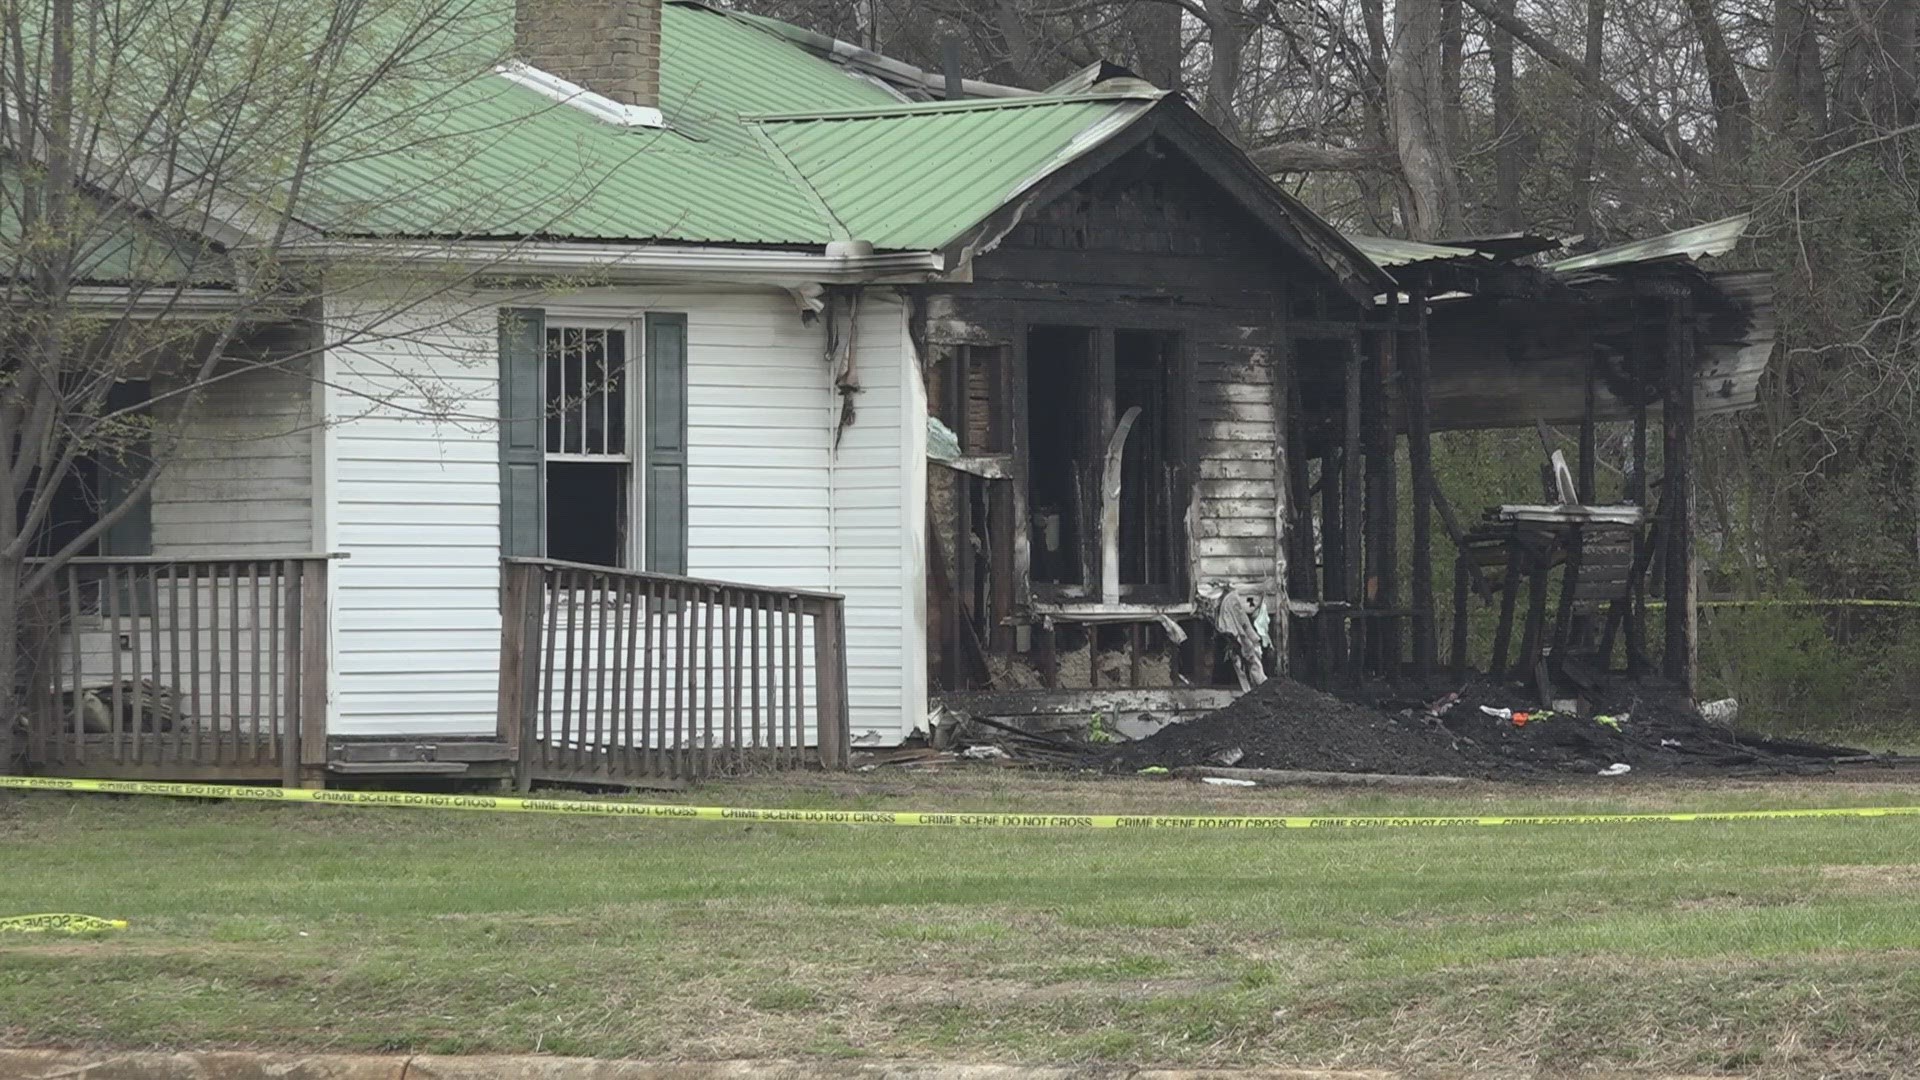 Lexington fire officials said Ronnie Metcalf went missing in the fire.